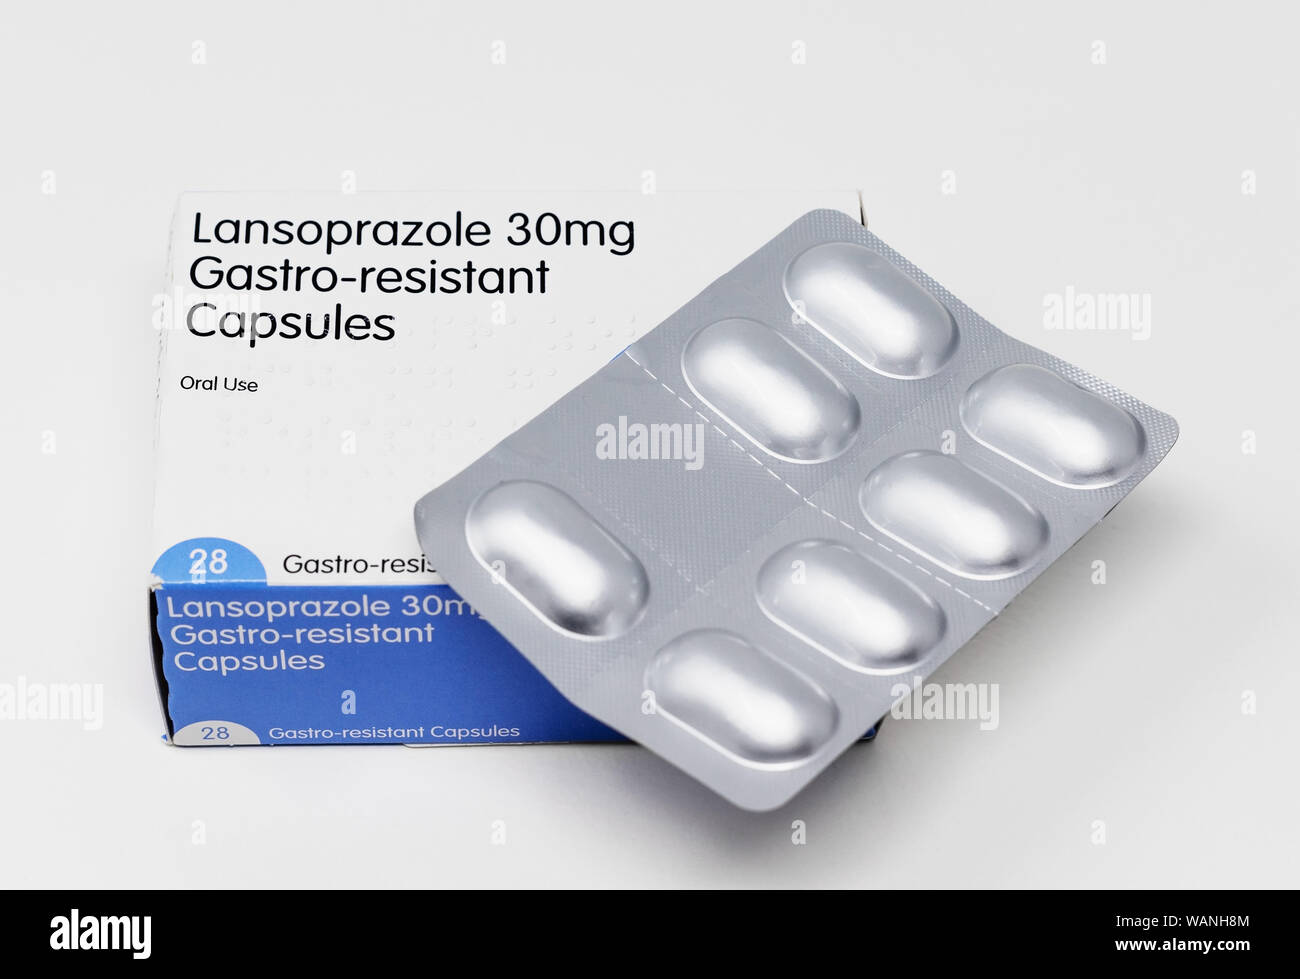 London / UK , August 17th 2019  - Box of Lansoprazole 30mg gastro-resistant capsules and blister pack, isolated on a white background Stock Photo